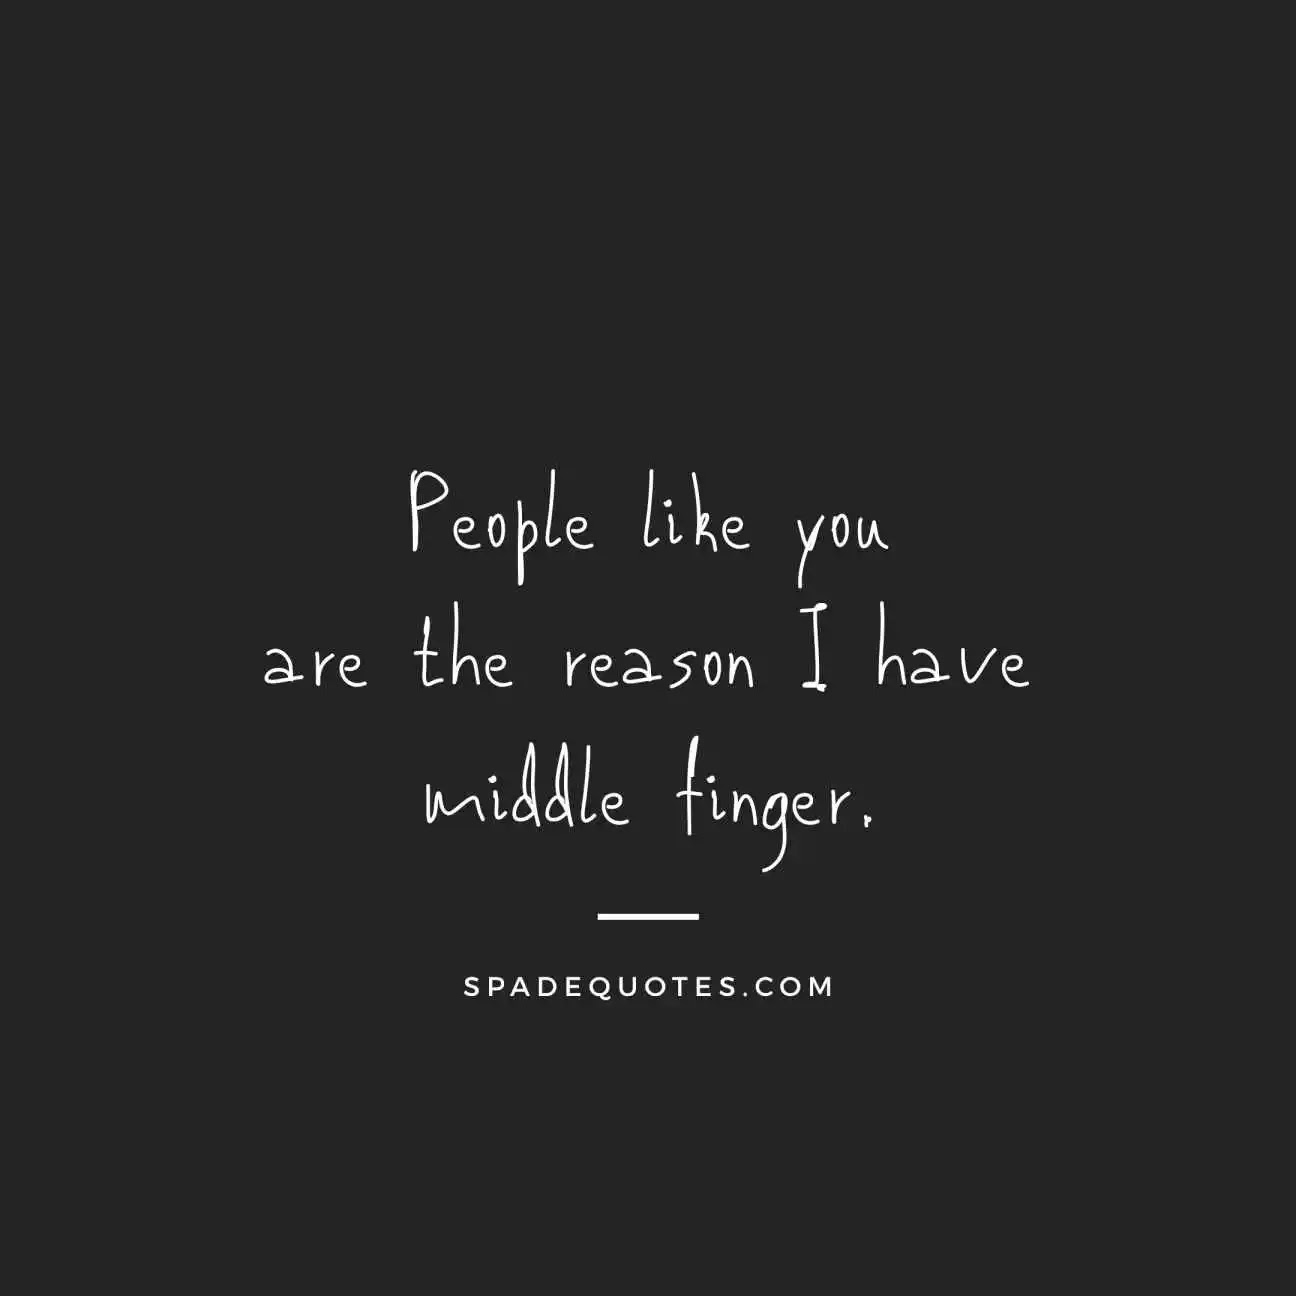 middle-finger-captions-killer-attitude-quotes-for-girls-spadequotes